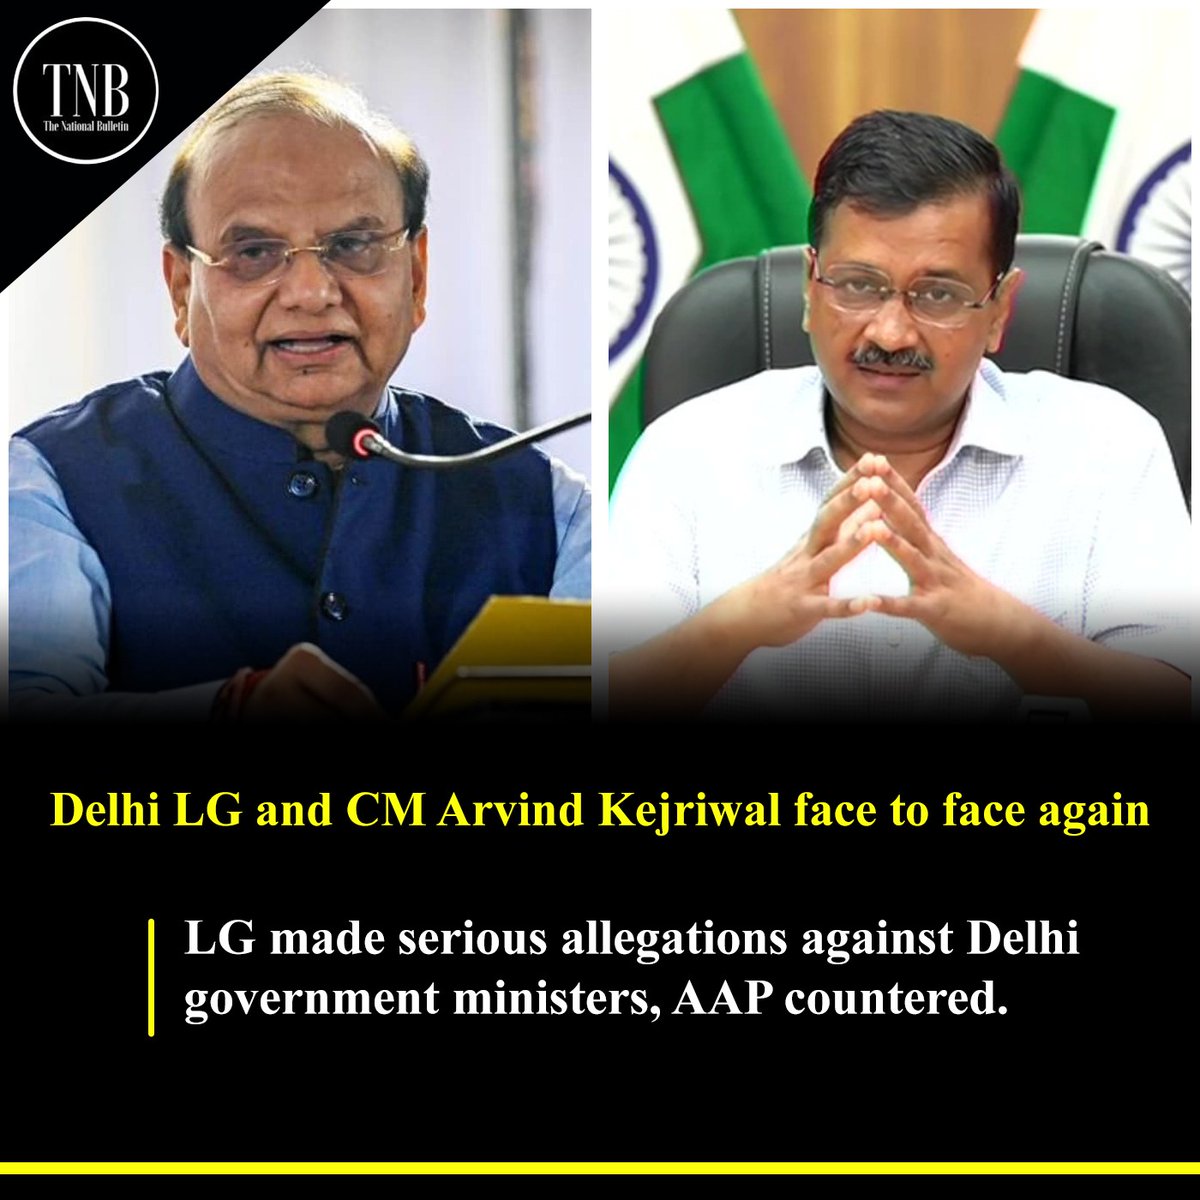 Delhi LG and Chief Minister Arvind Kejriwal face to face again. LG made serious allegations against Delhi government ministers, AAP countered.

#LG #CMArvindKejriwal #ArvindKejriwal #DelhiGovt #DelhiGoverment #AAP #Aamaadmiparty #DelhiNews
#TheNationalBulletin